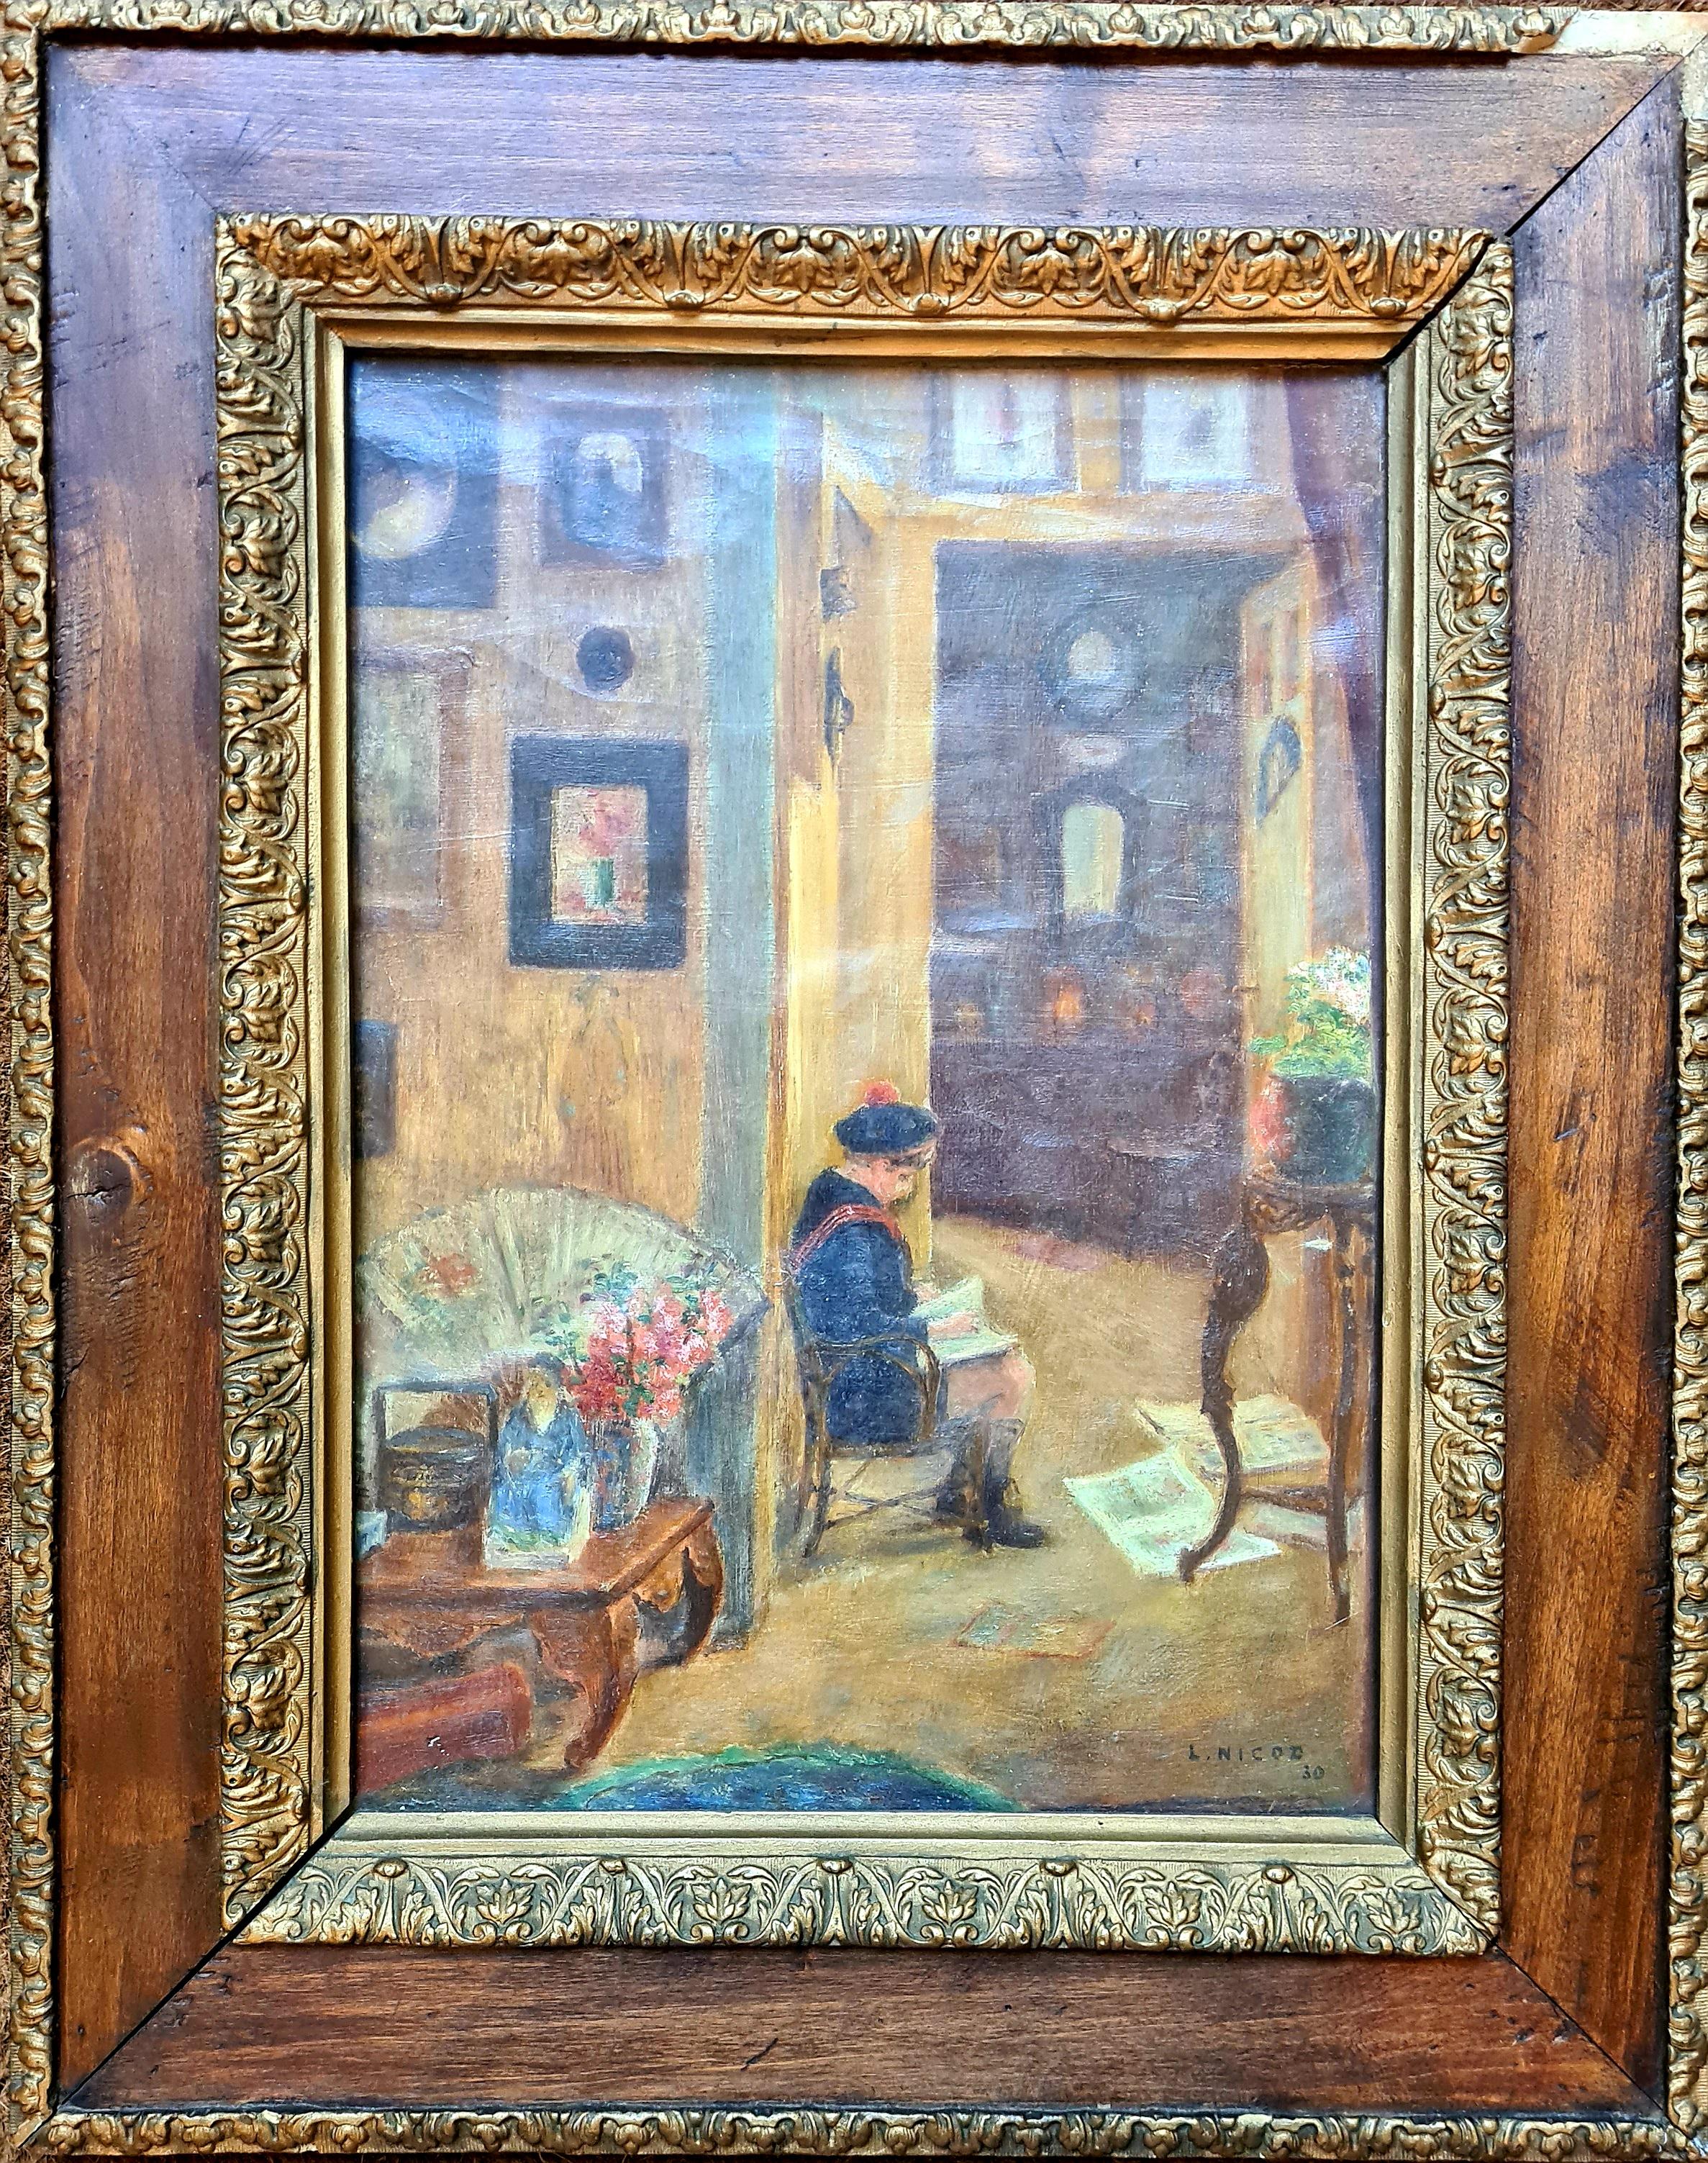 Early 20th Century French Chateau interior scene of a richly decorated salon with a small child sketching by L Nicod. Signed and dated bottom right with location on the rear back board. presented  in wood and gilt frame. We have another two works by